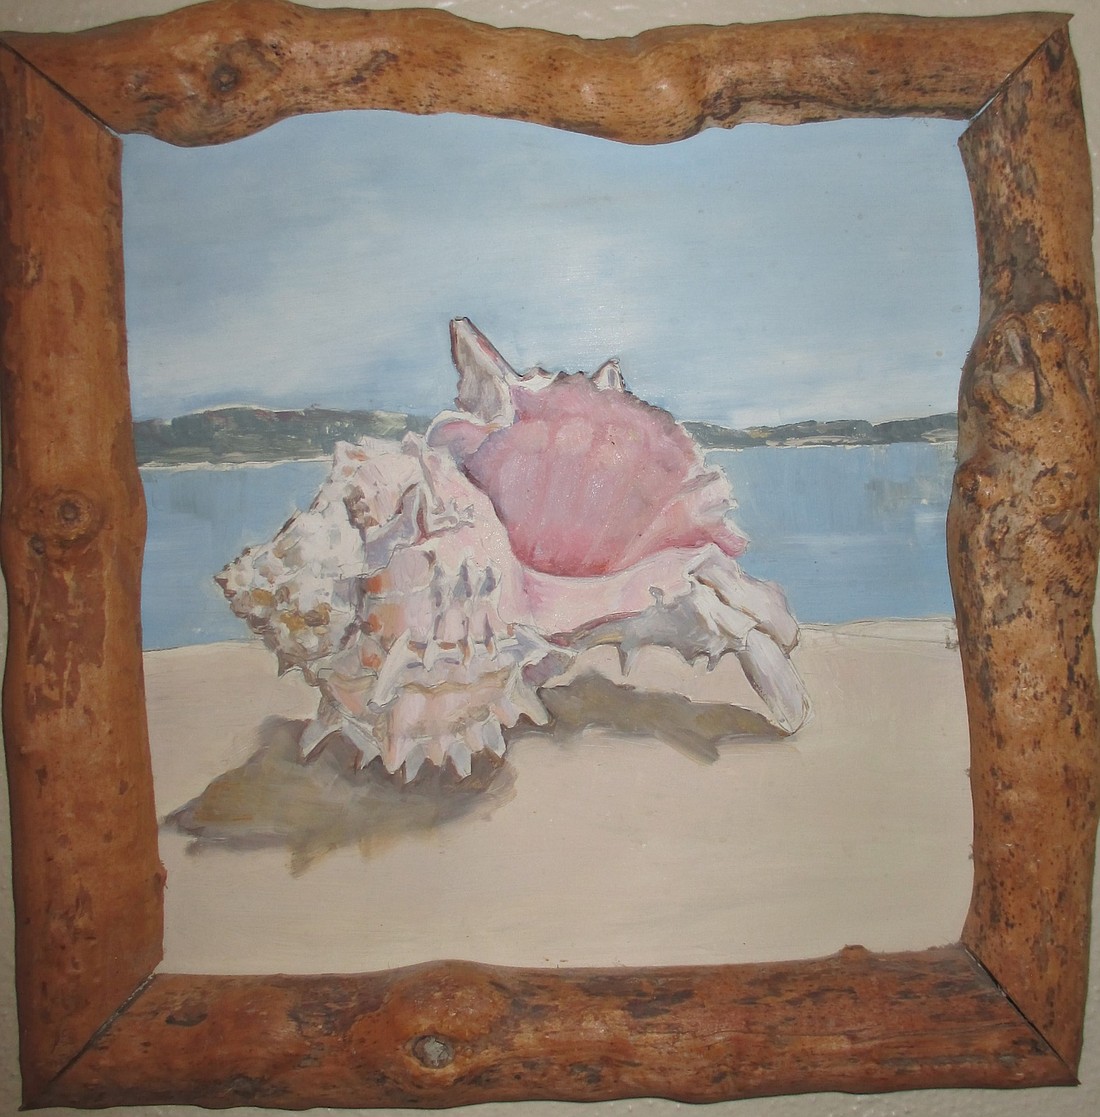 Seashell painting by my clever mom.